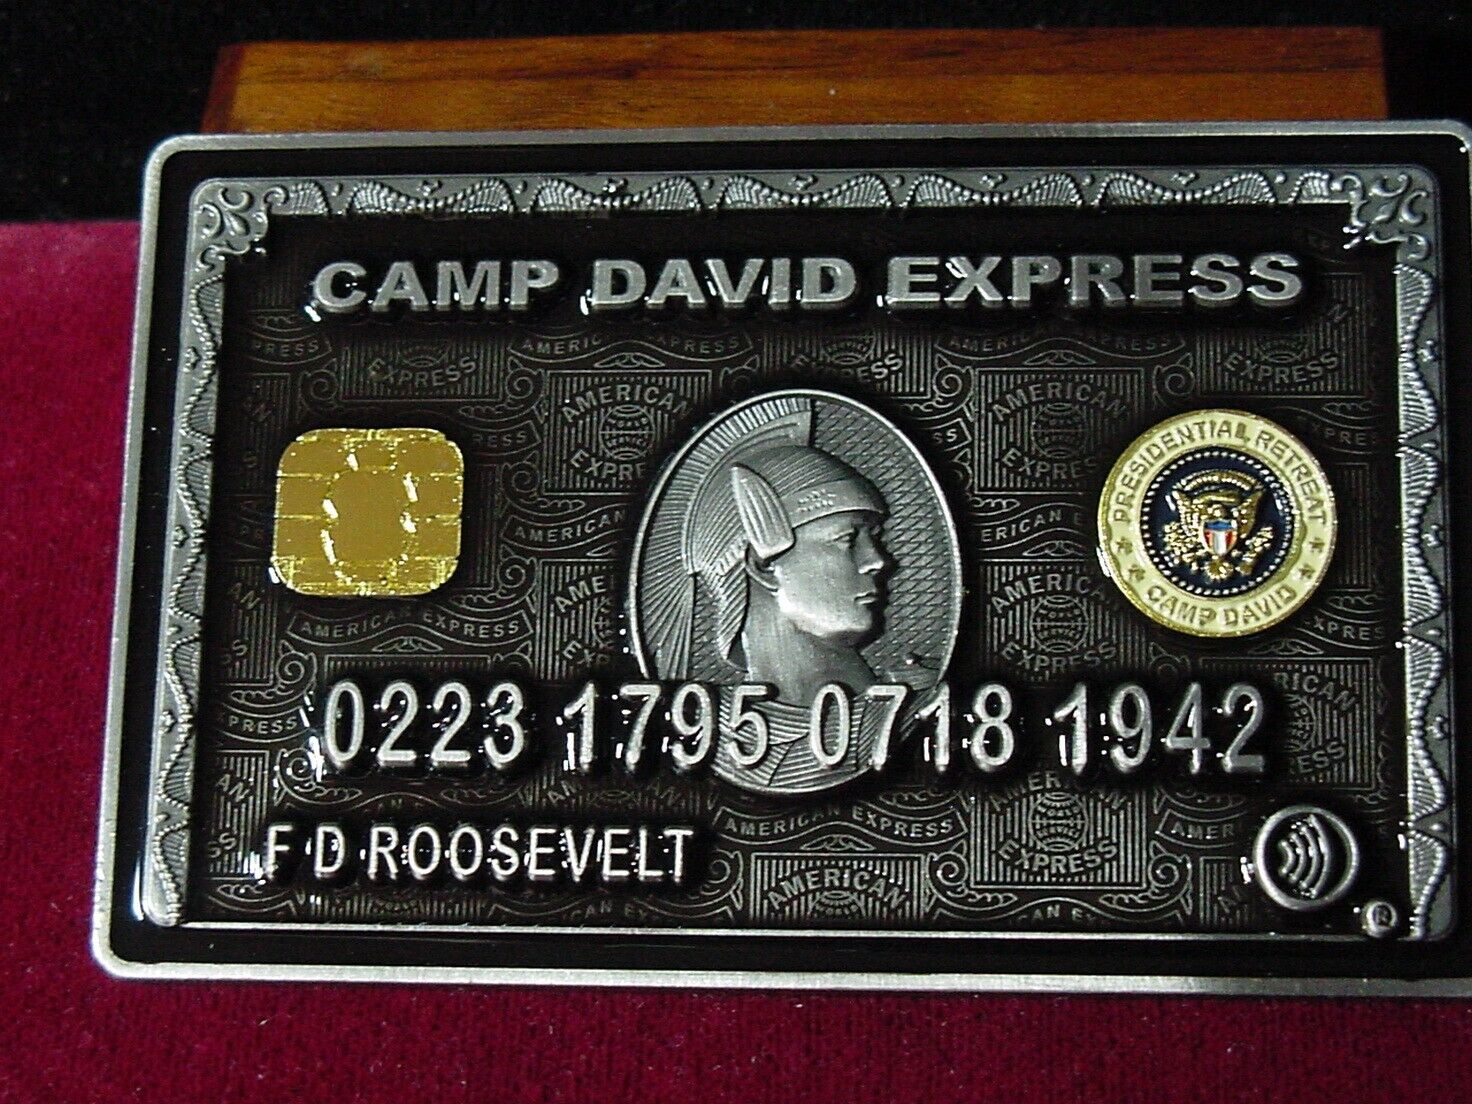 Presidential retreat Camp David Challenge coin #126 - Supply Department